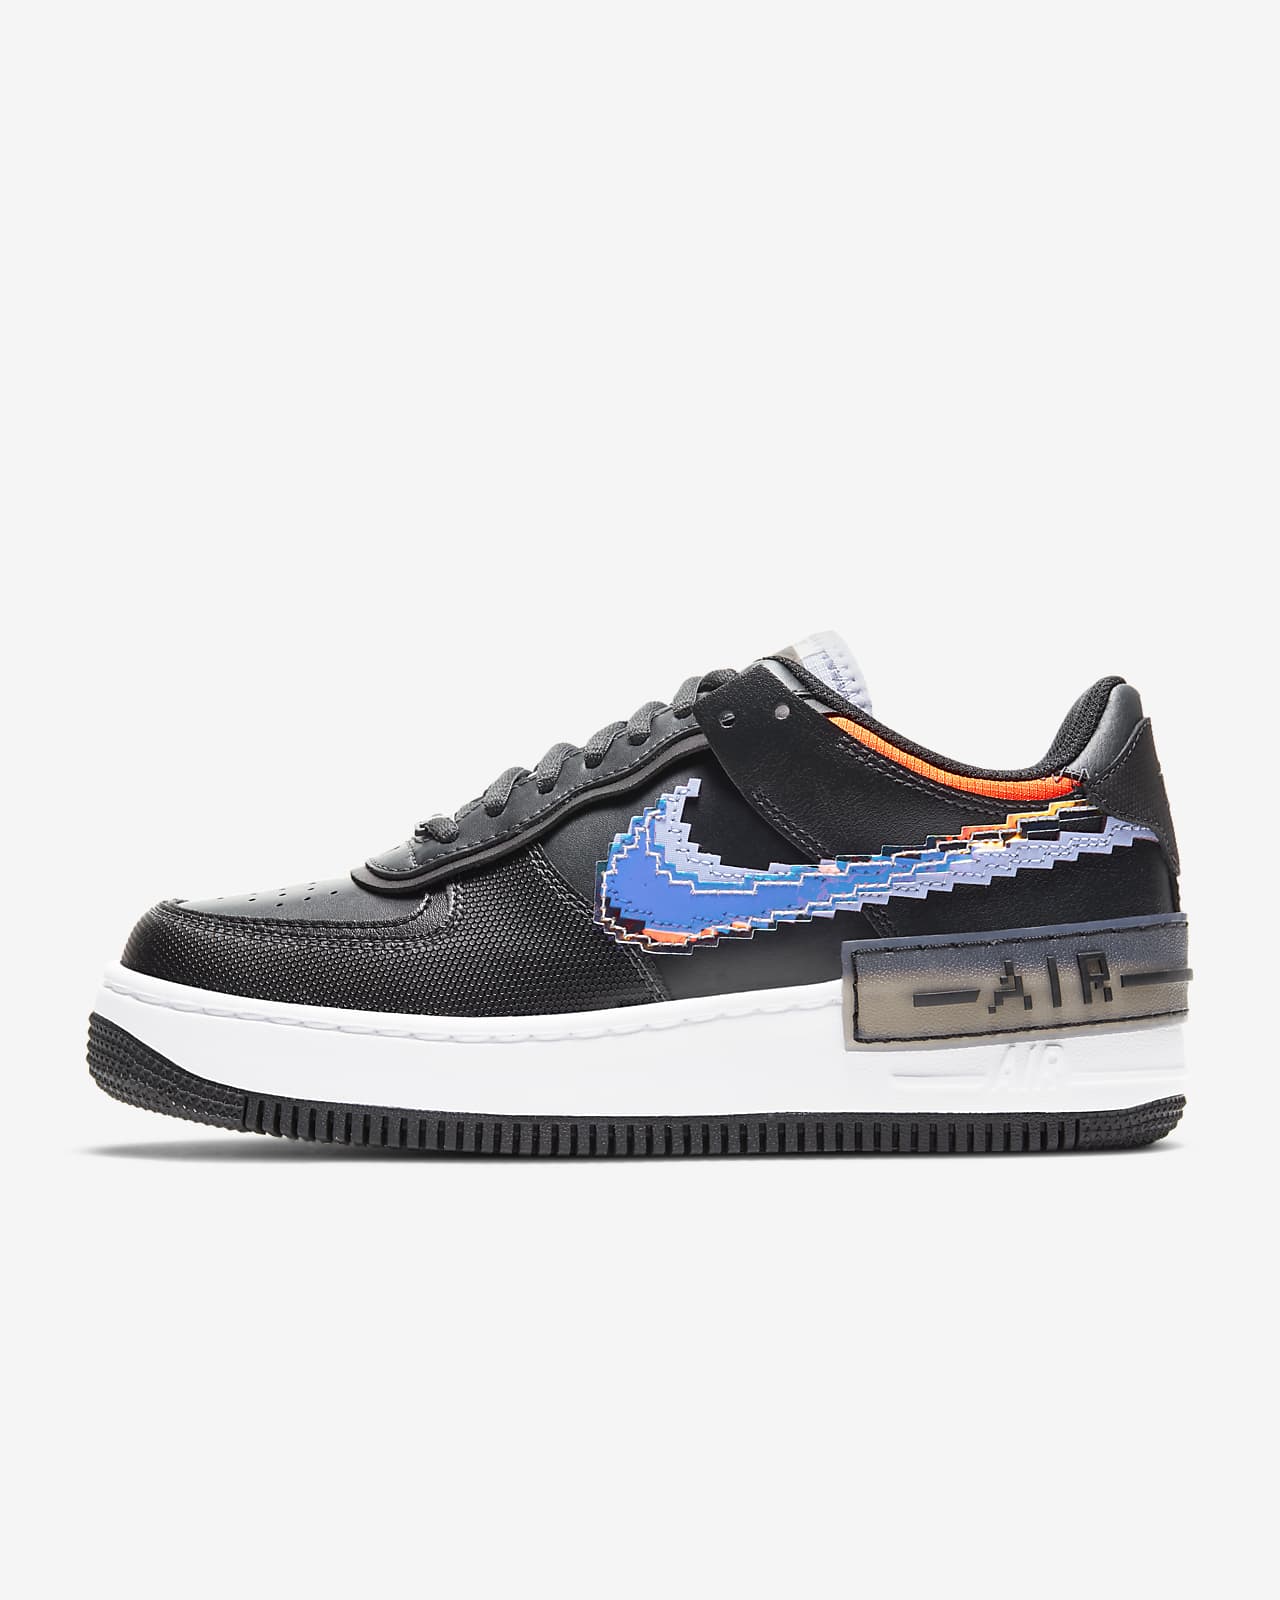 mike air force 1 shadow